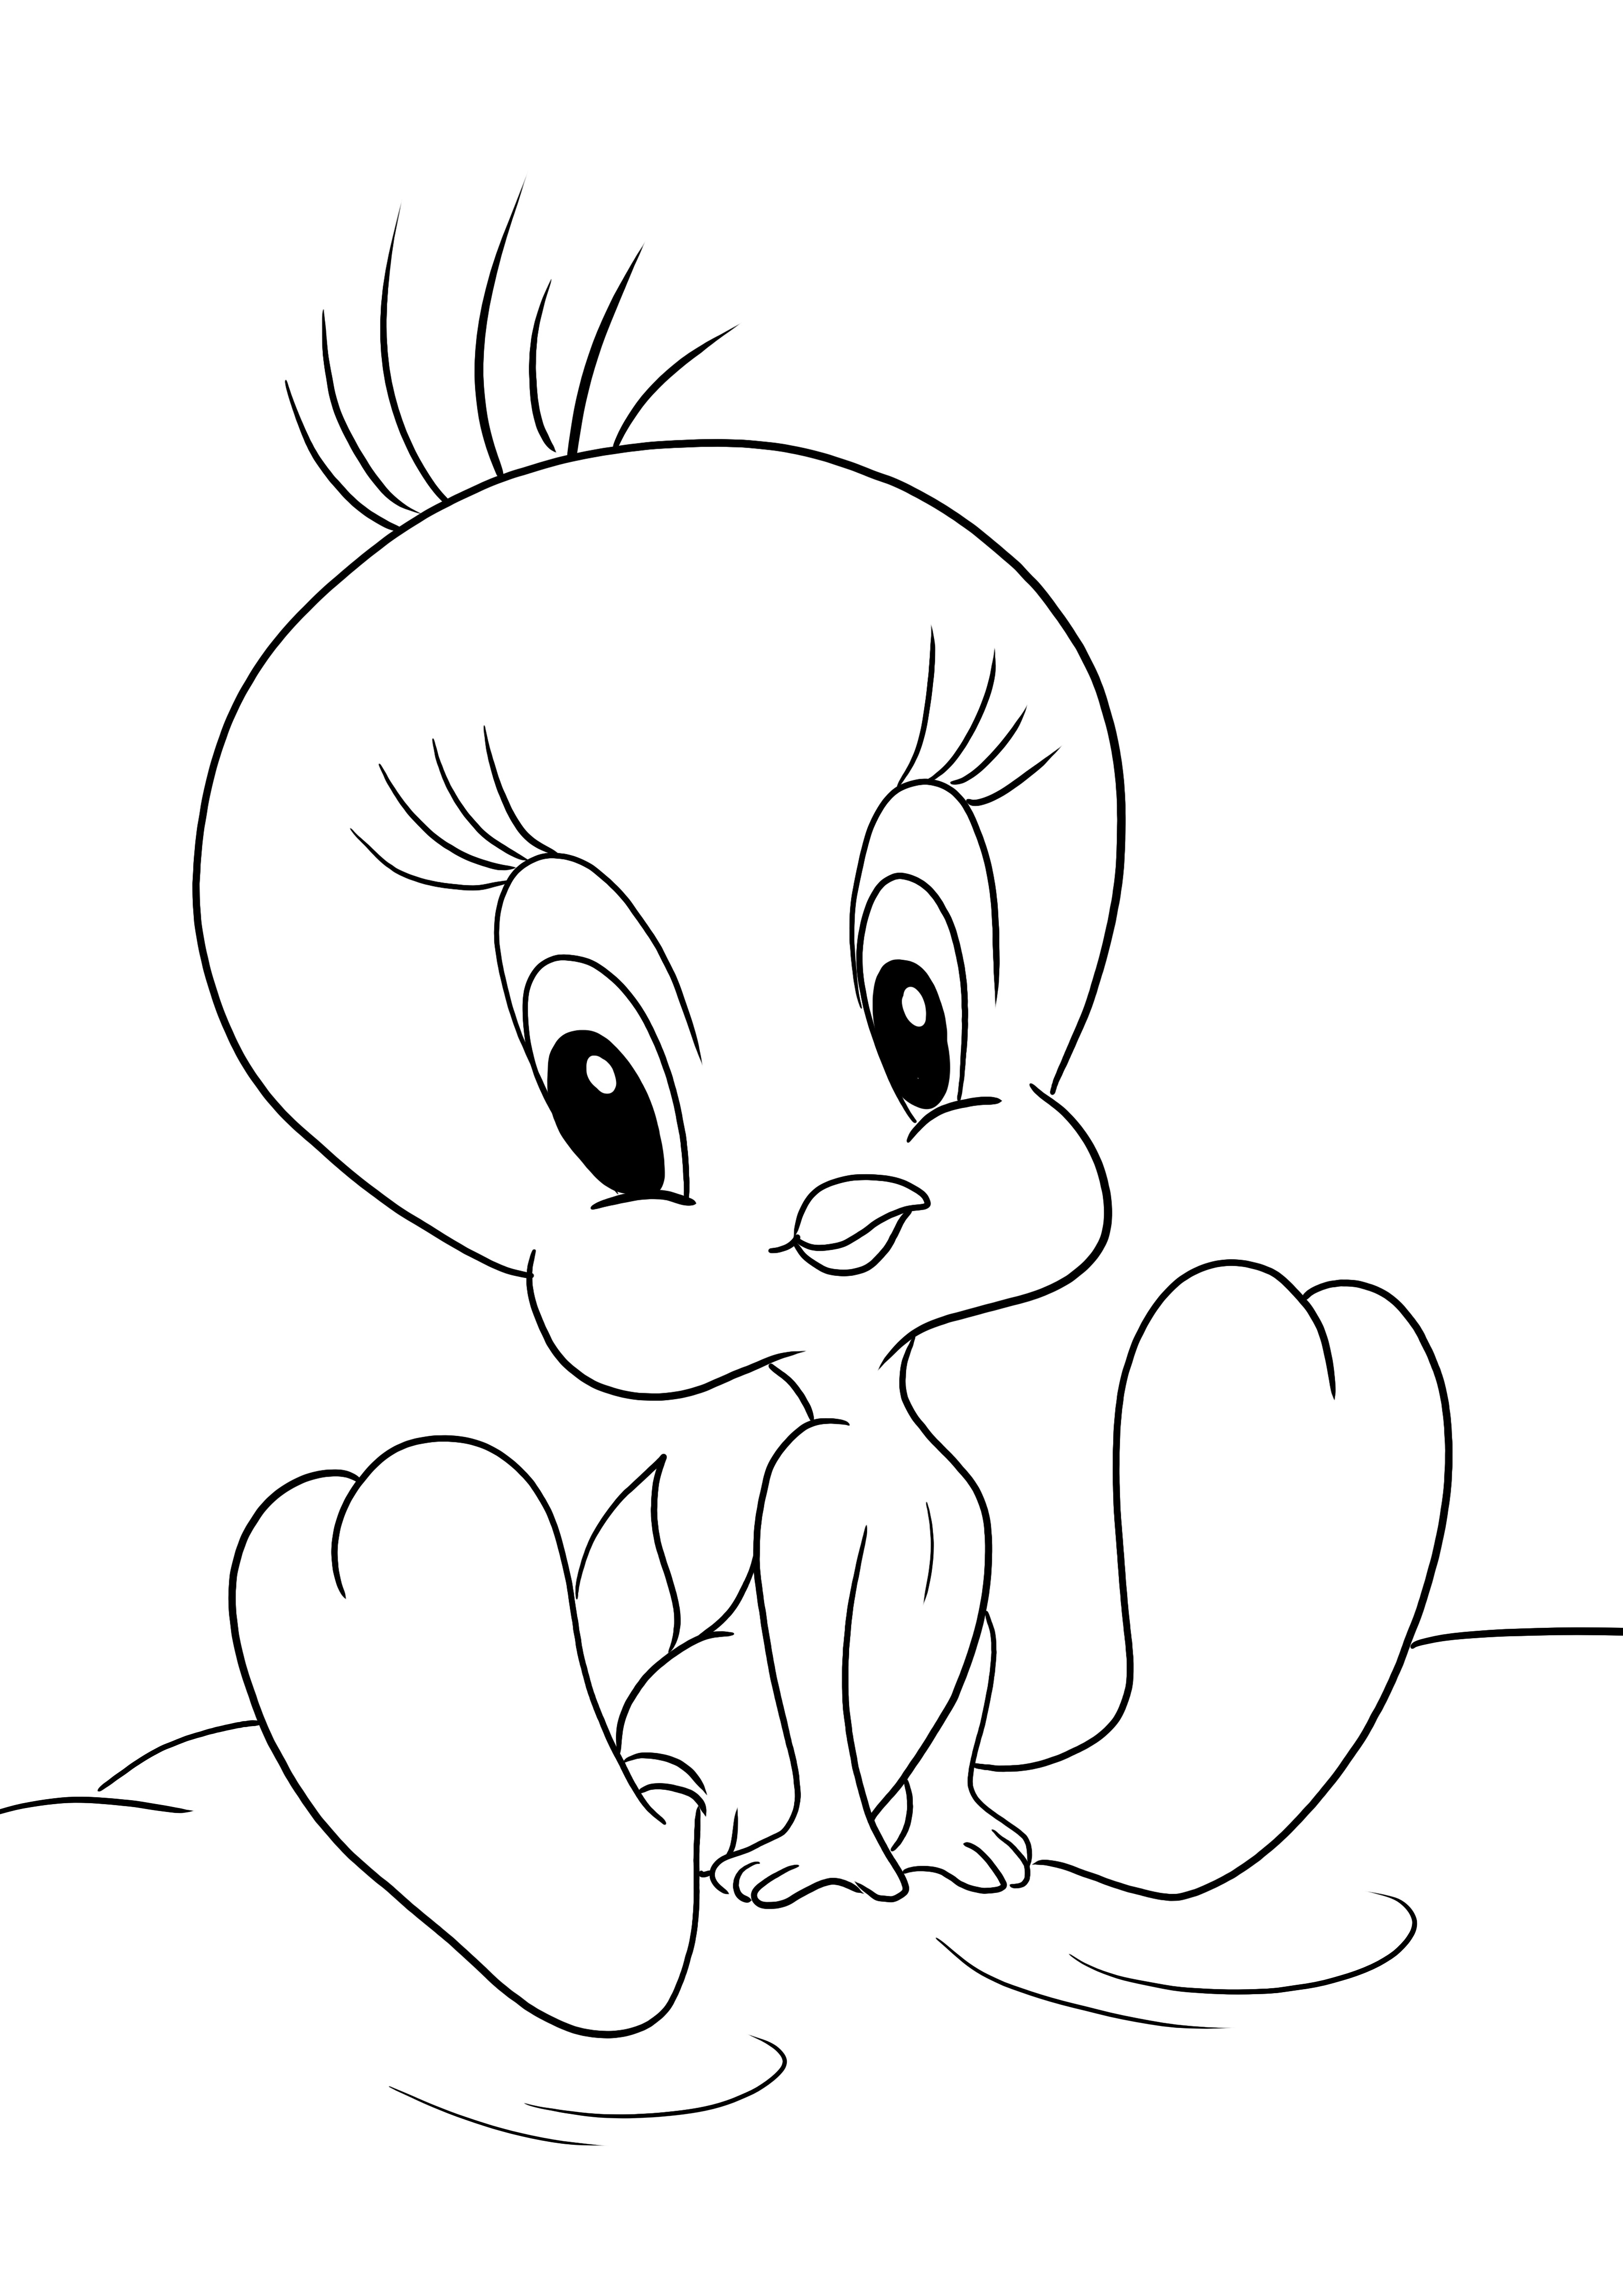 Tweety coloring picture to download or orint for free and color